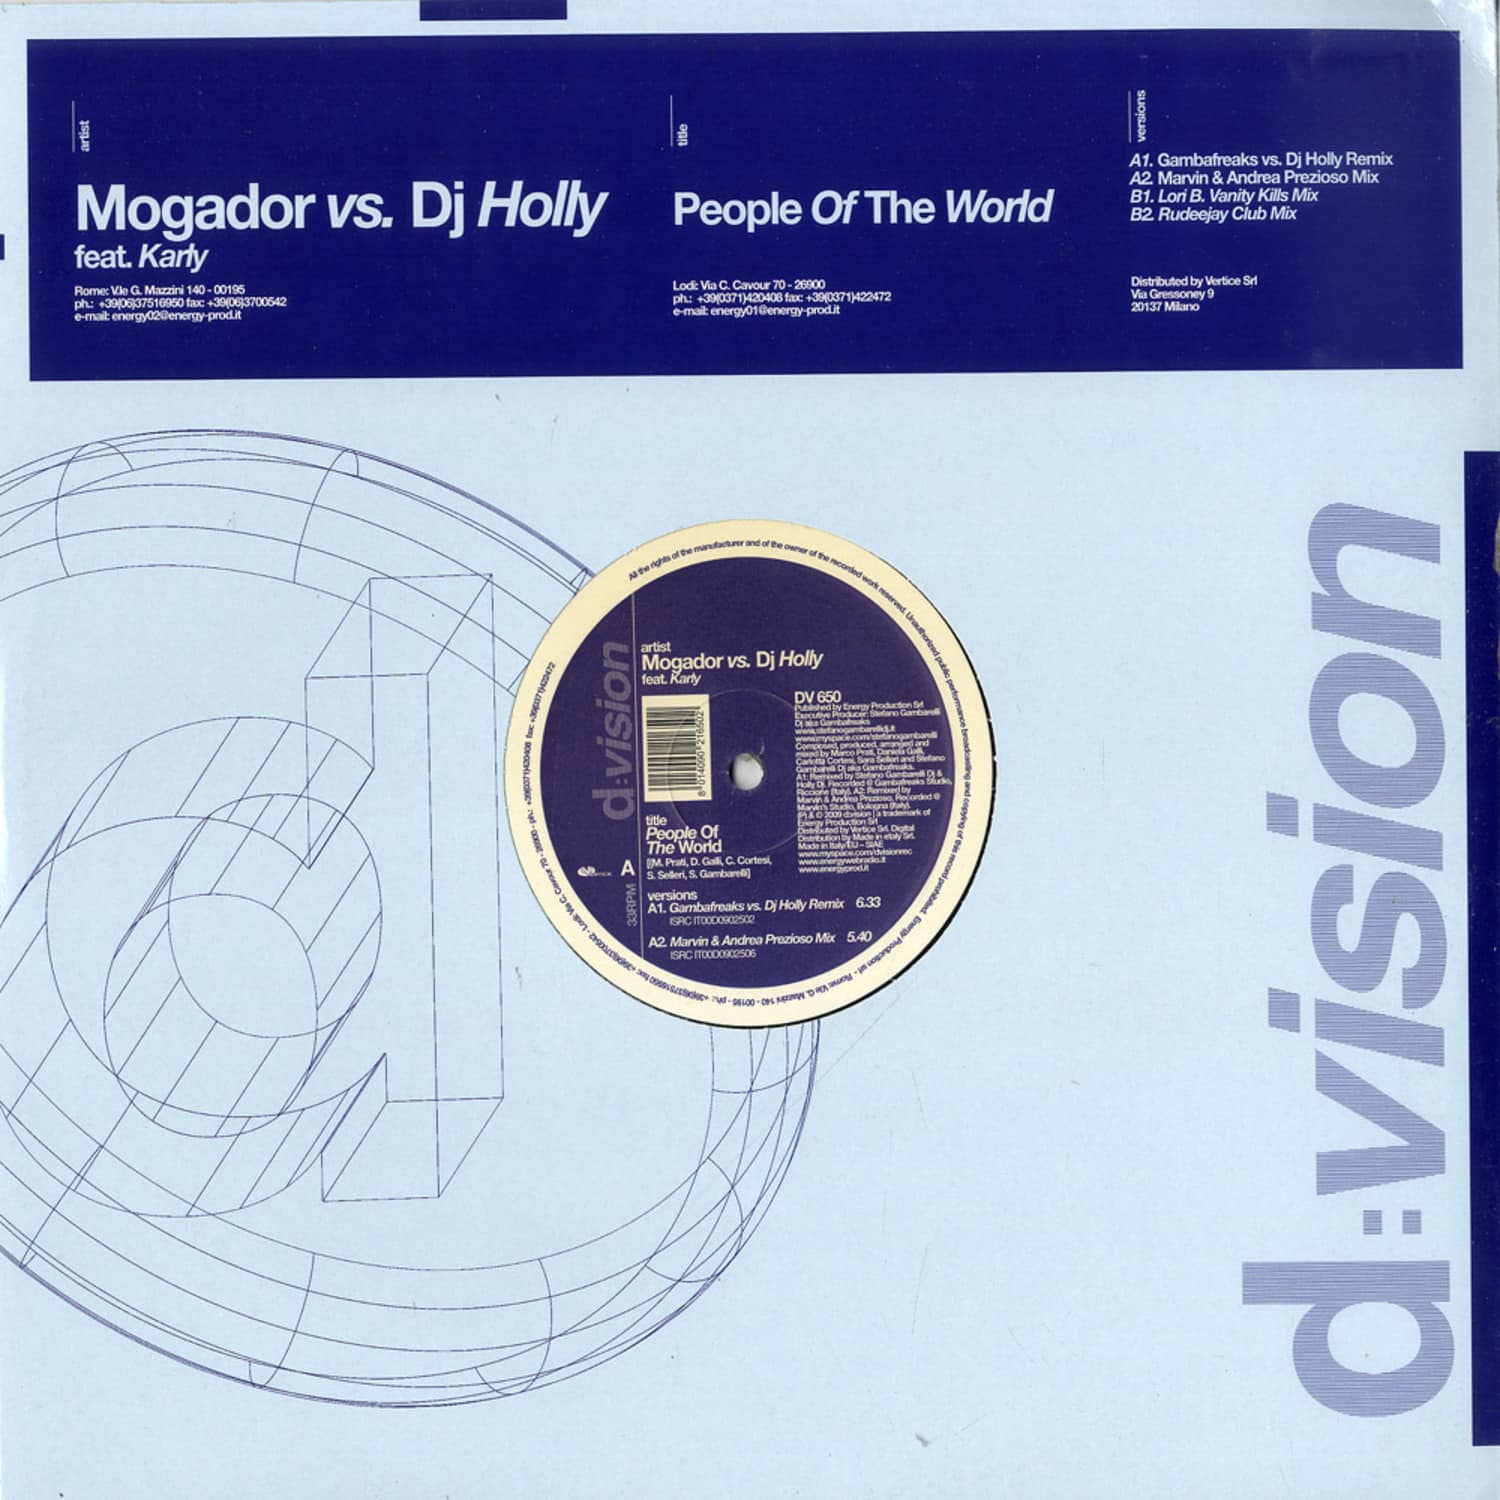 Mogador vs. Dj Holly - PEOPLE OF THE WORLD